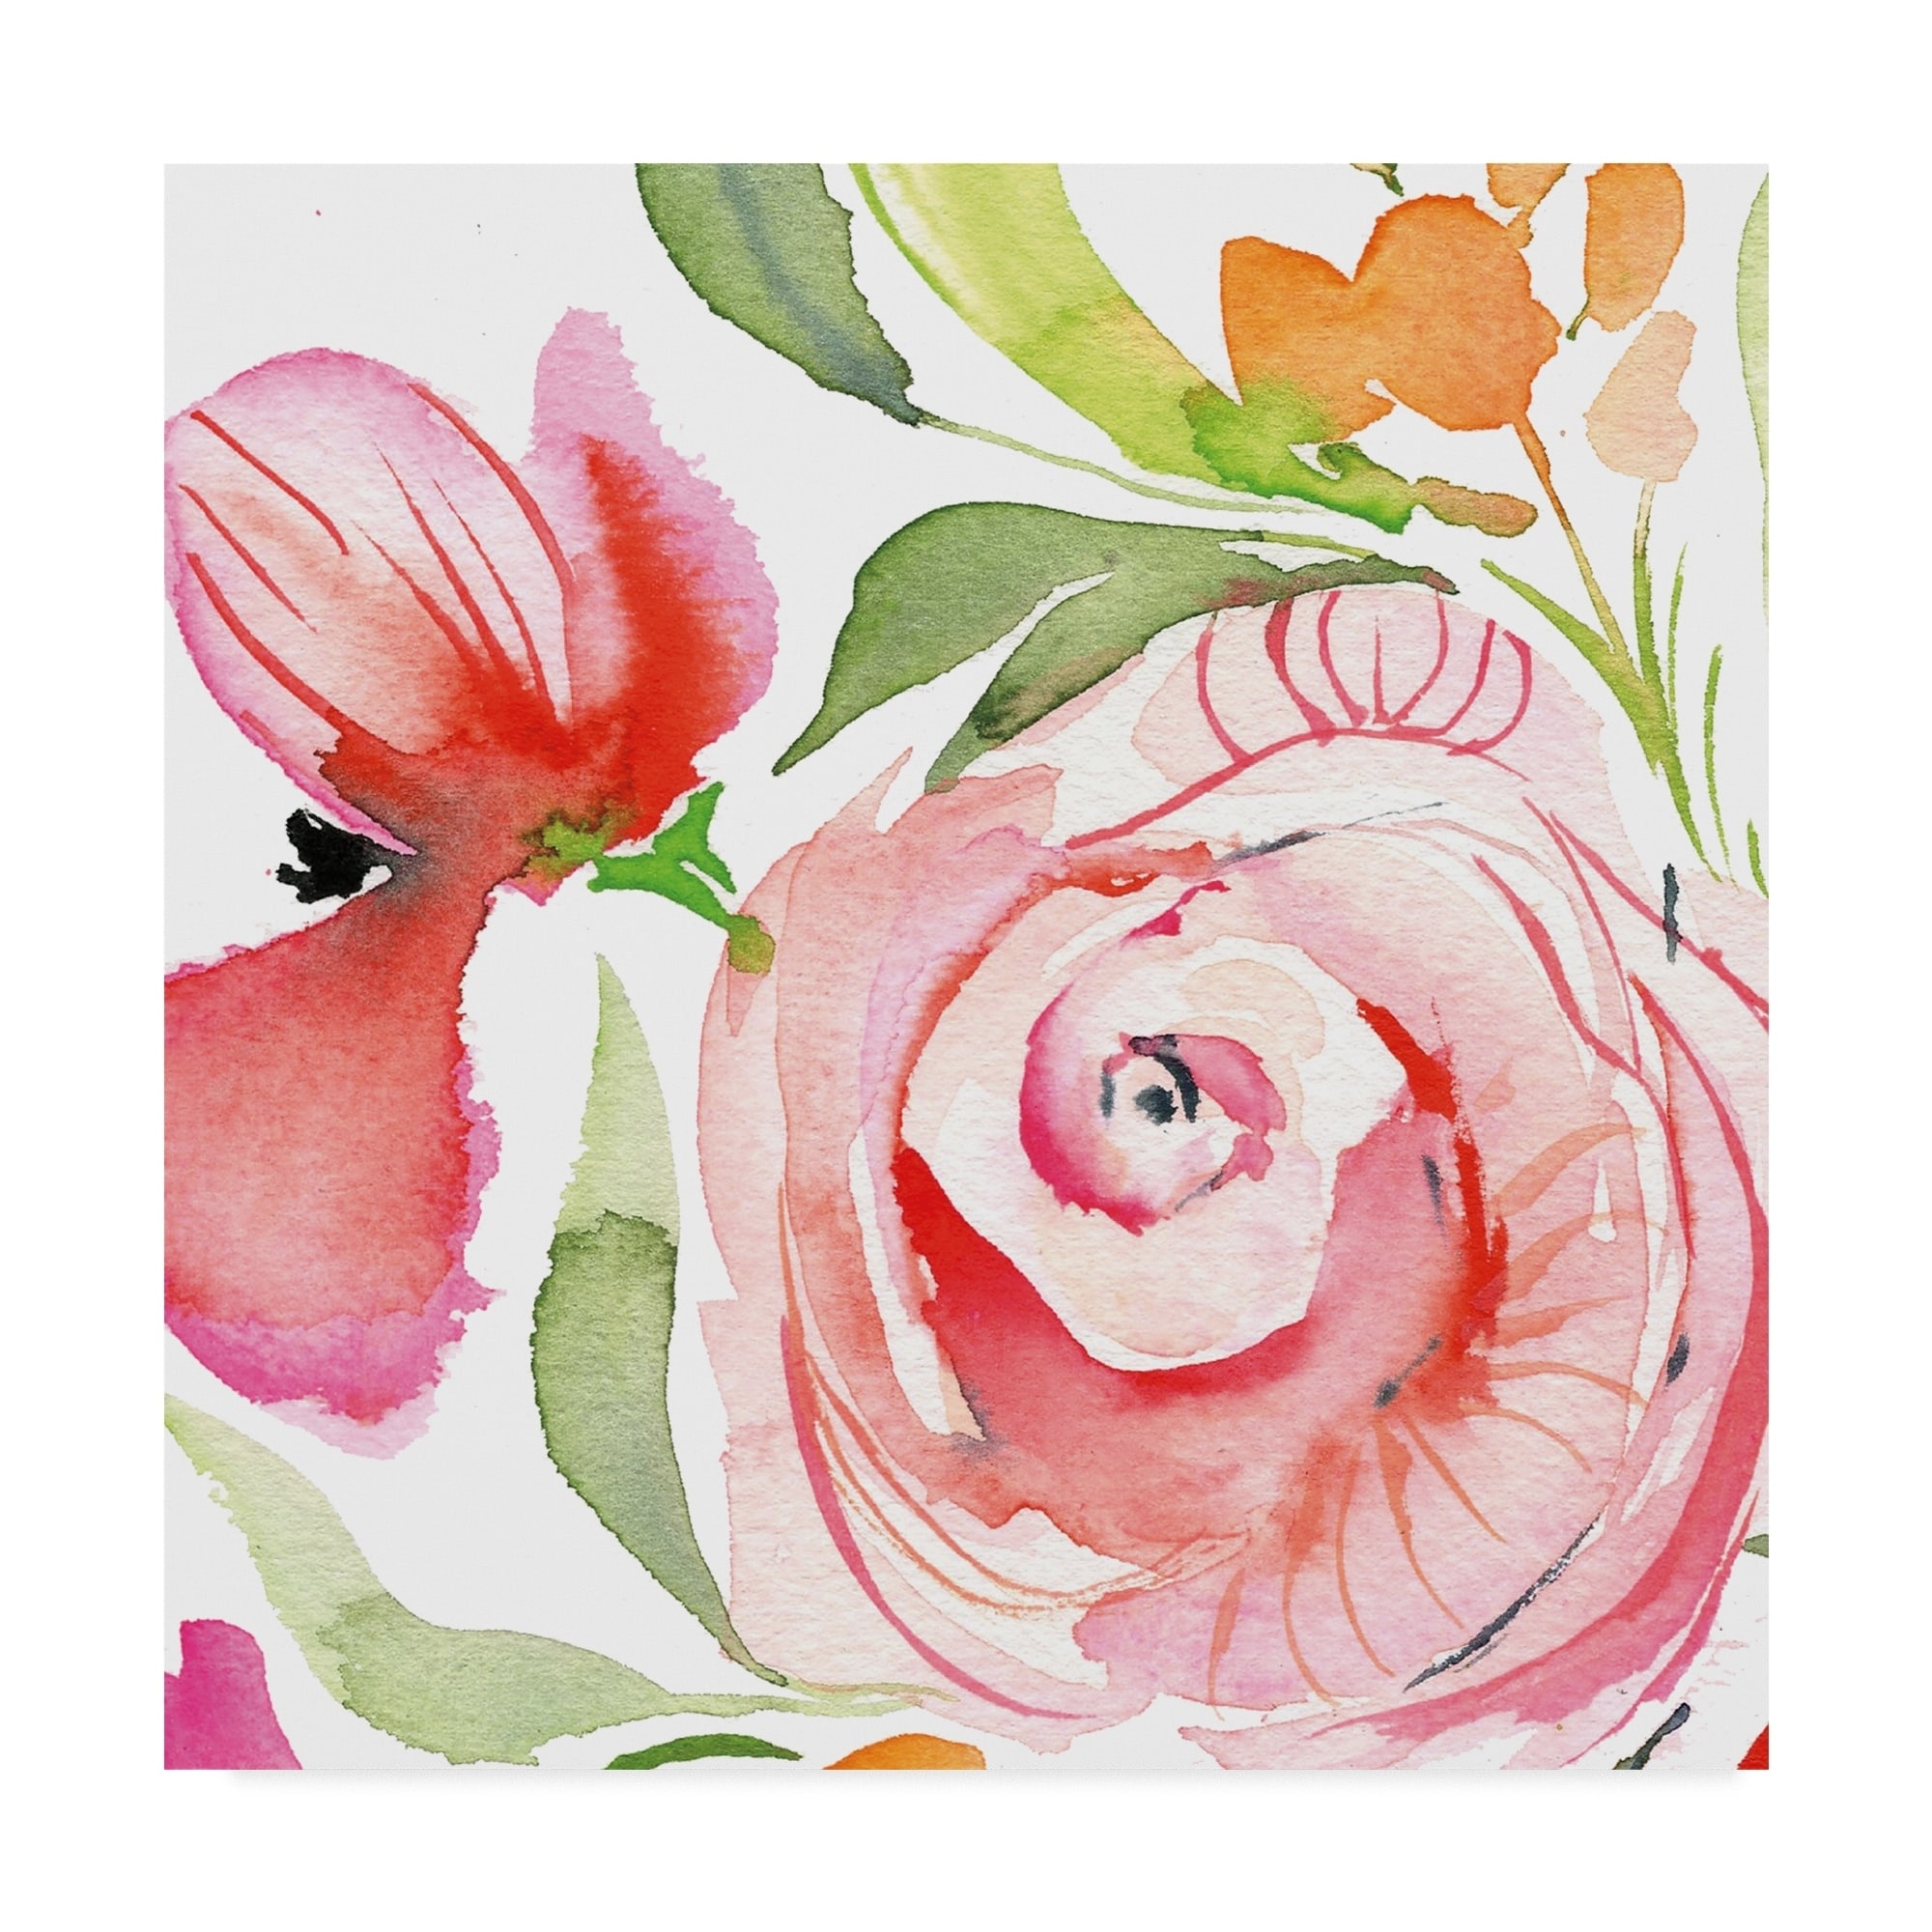 Kristy Rice 'Bloom To Remember Iv' Canvas Art - Bed Bath & Beyond - 22041111